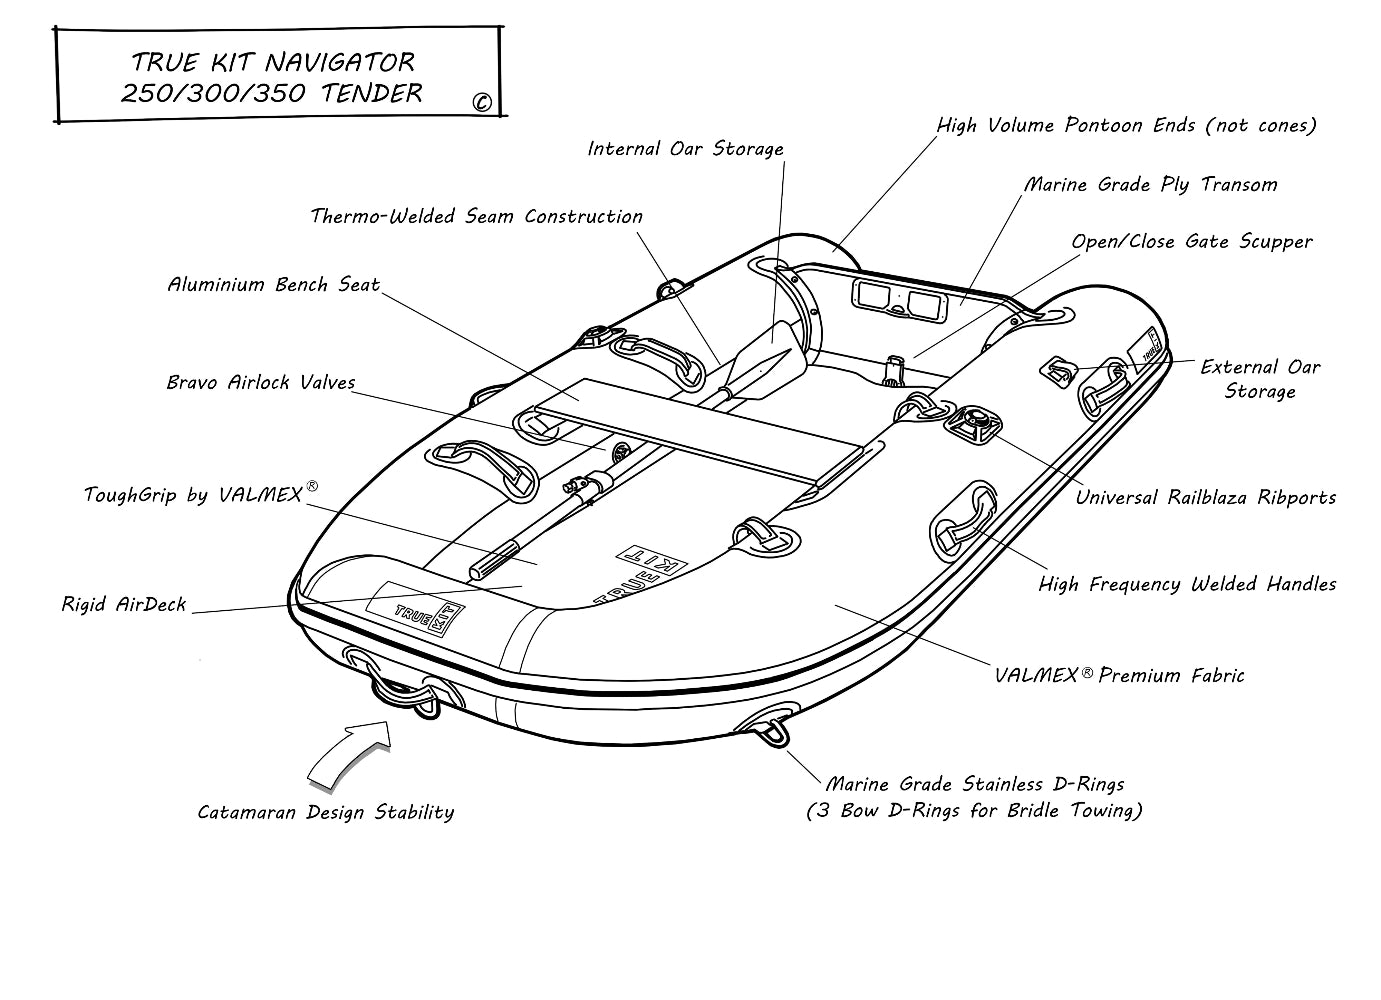 True Kit Navigator drawing showing all the features of our inflatable catamaran tender